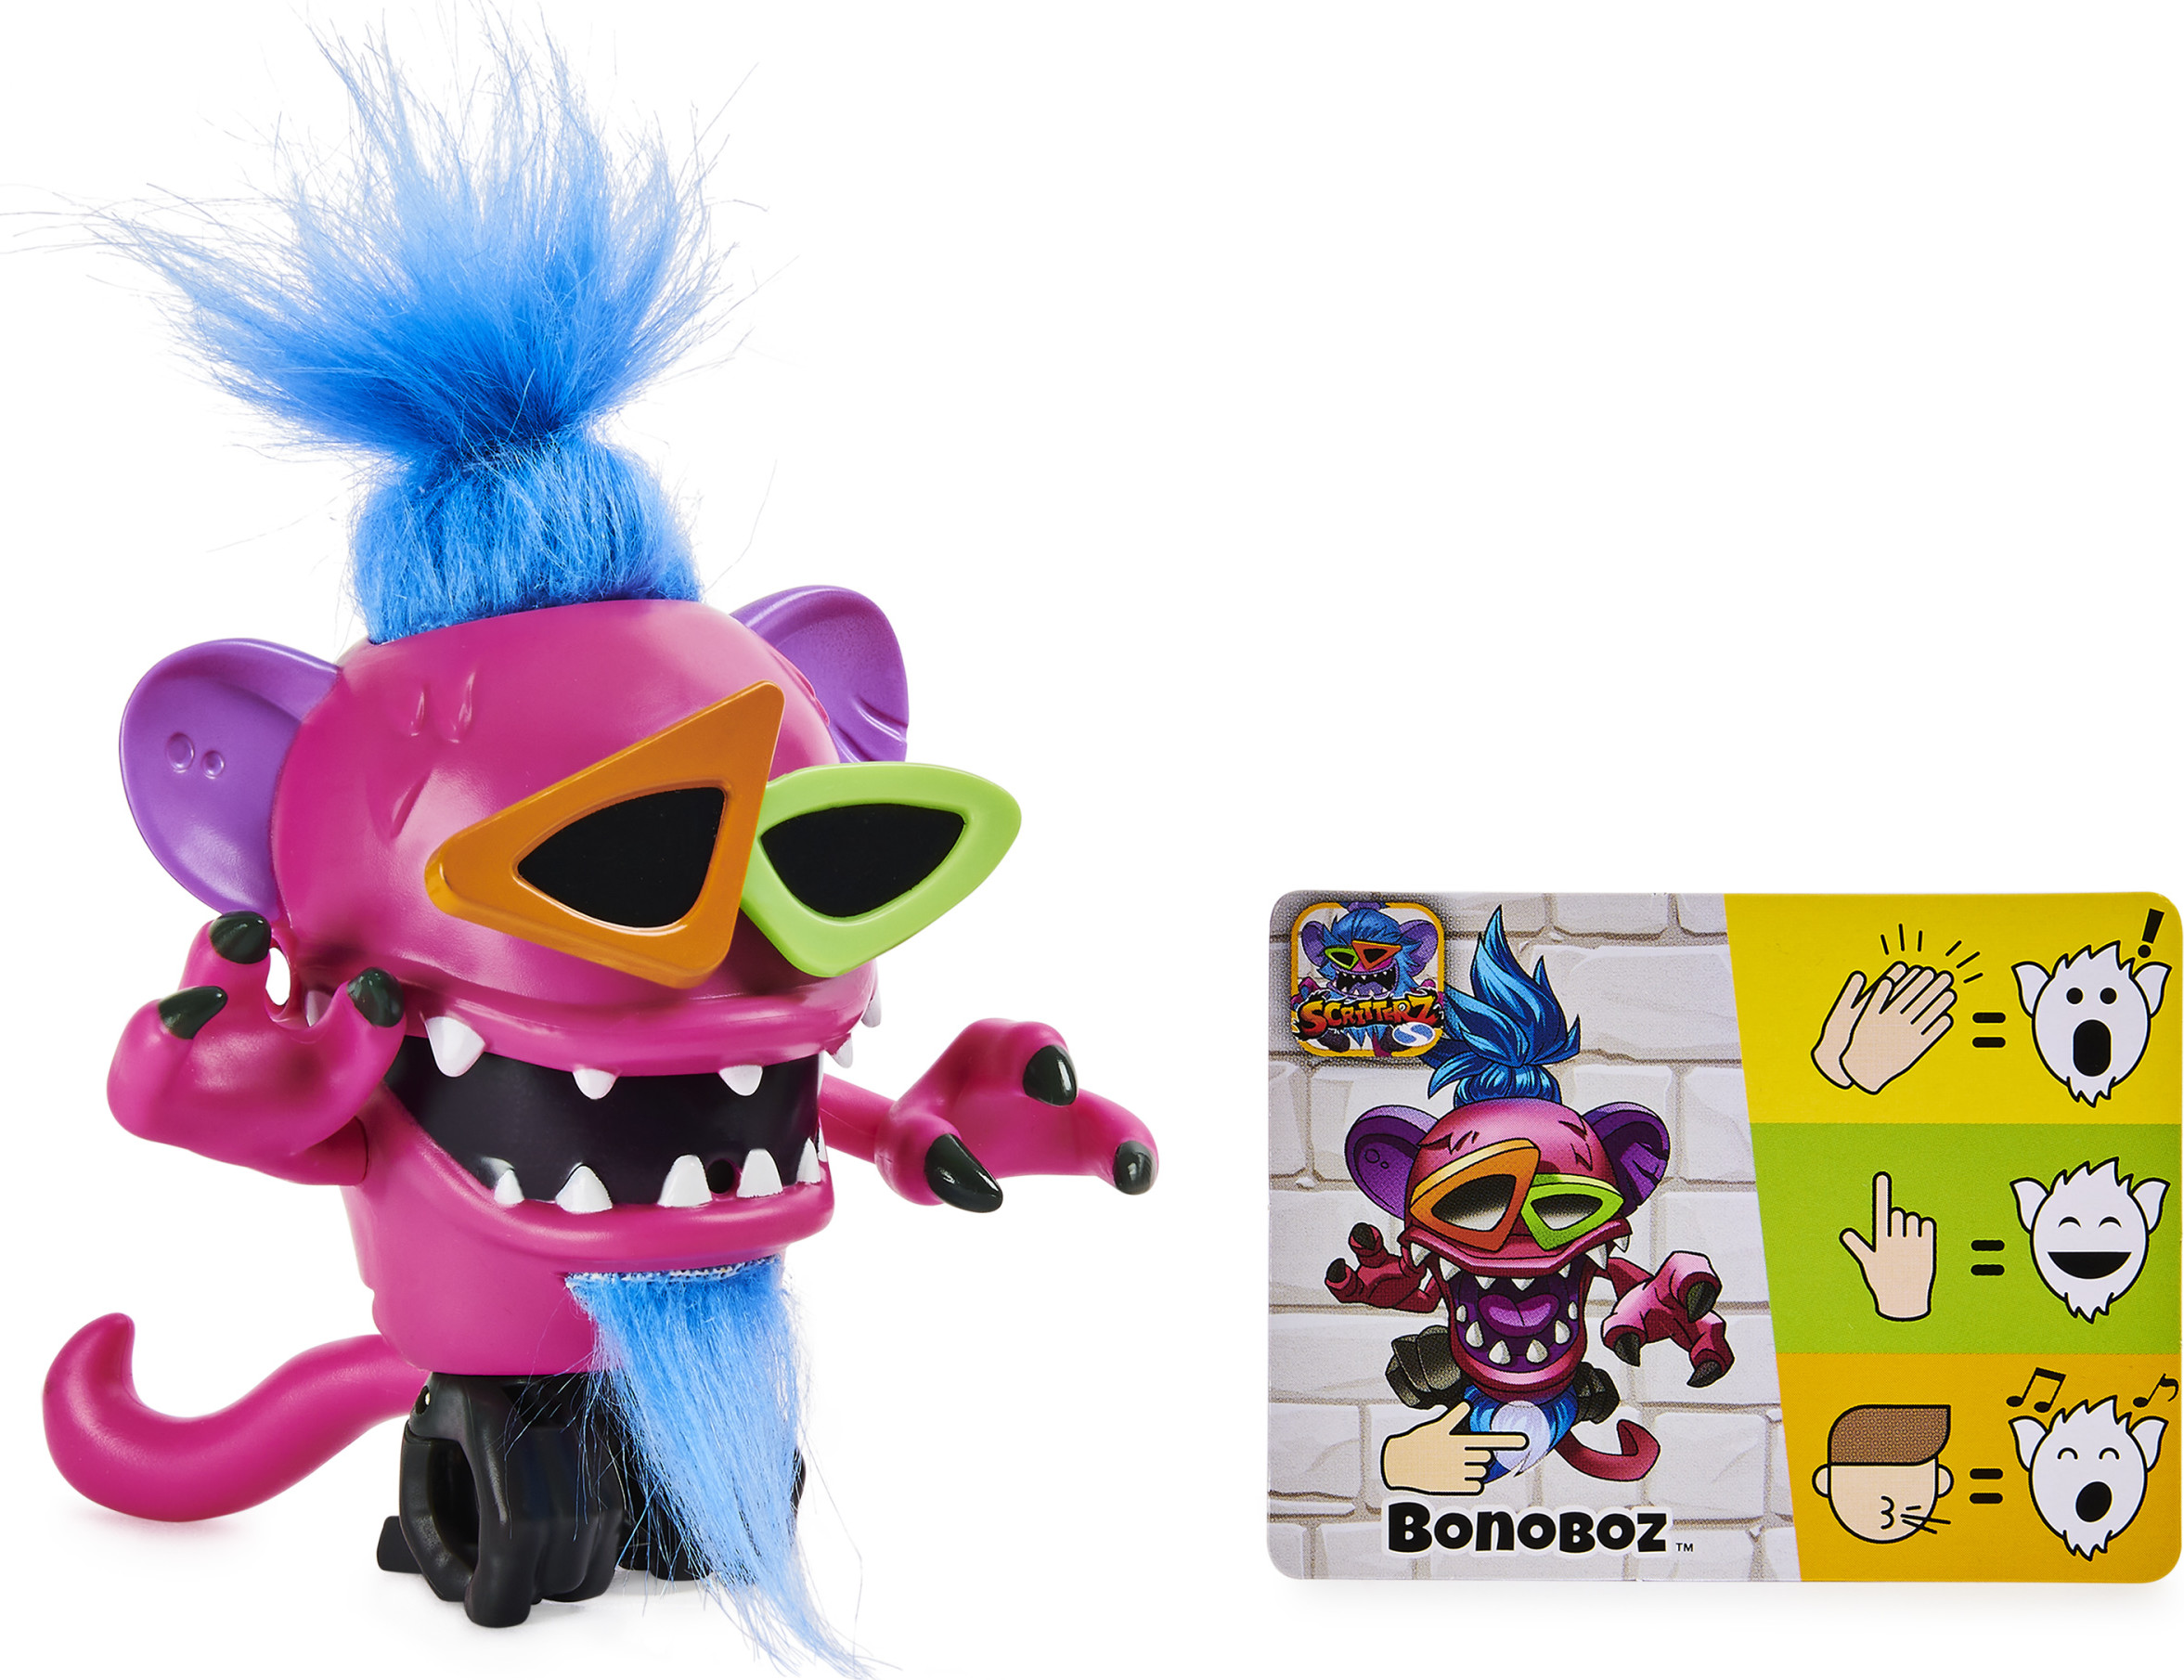 Scritterz, Bonoboz Interactive Collectible Jungle Creature Toy with Sounds and Movement, for Kids Aged 5 and up - image 3 of 8